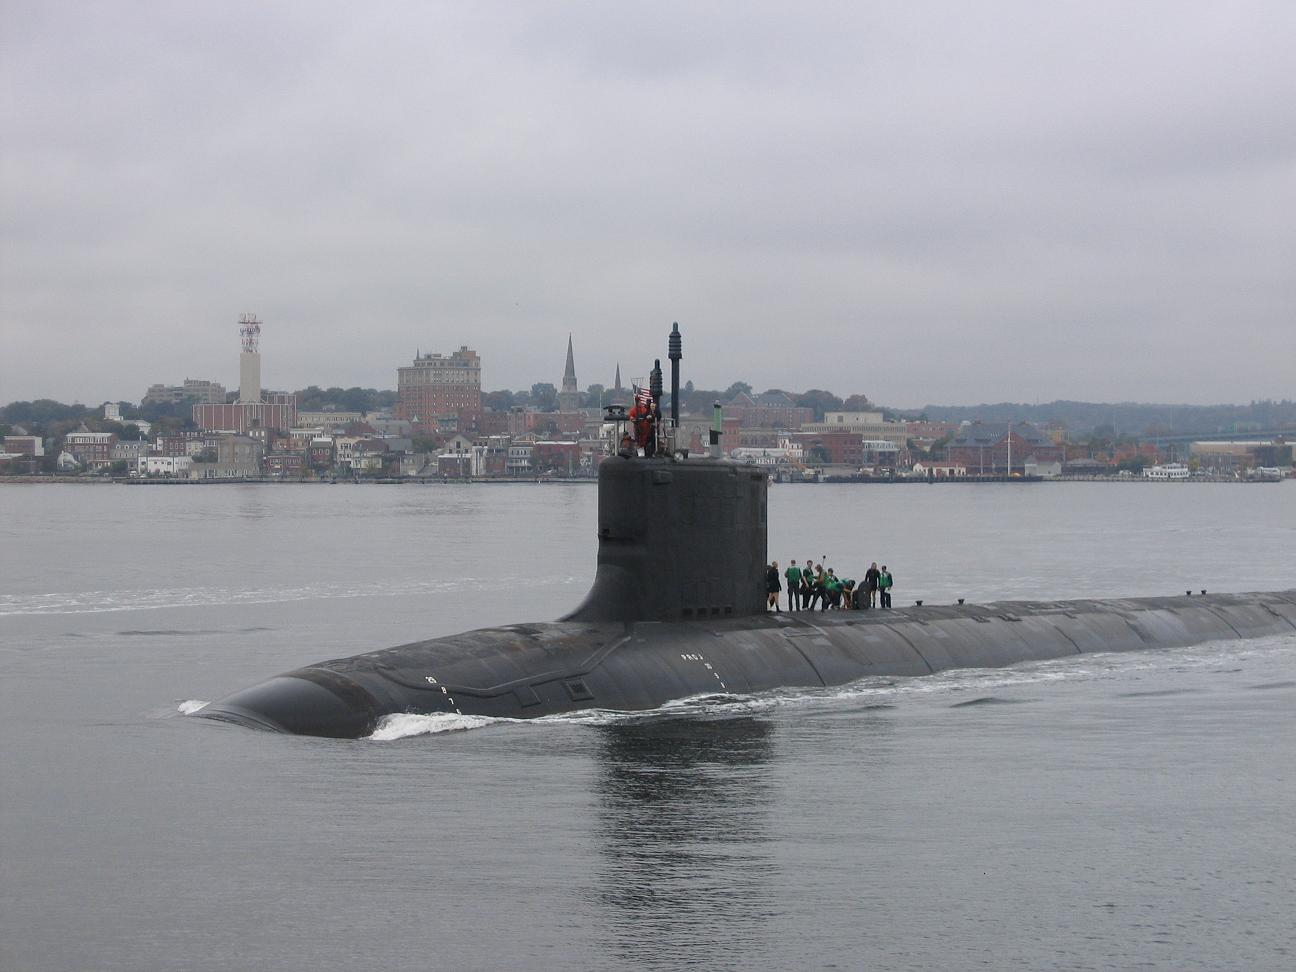 A nuclear submarine at New London